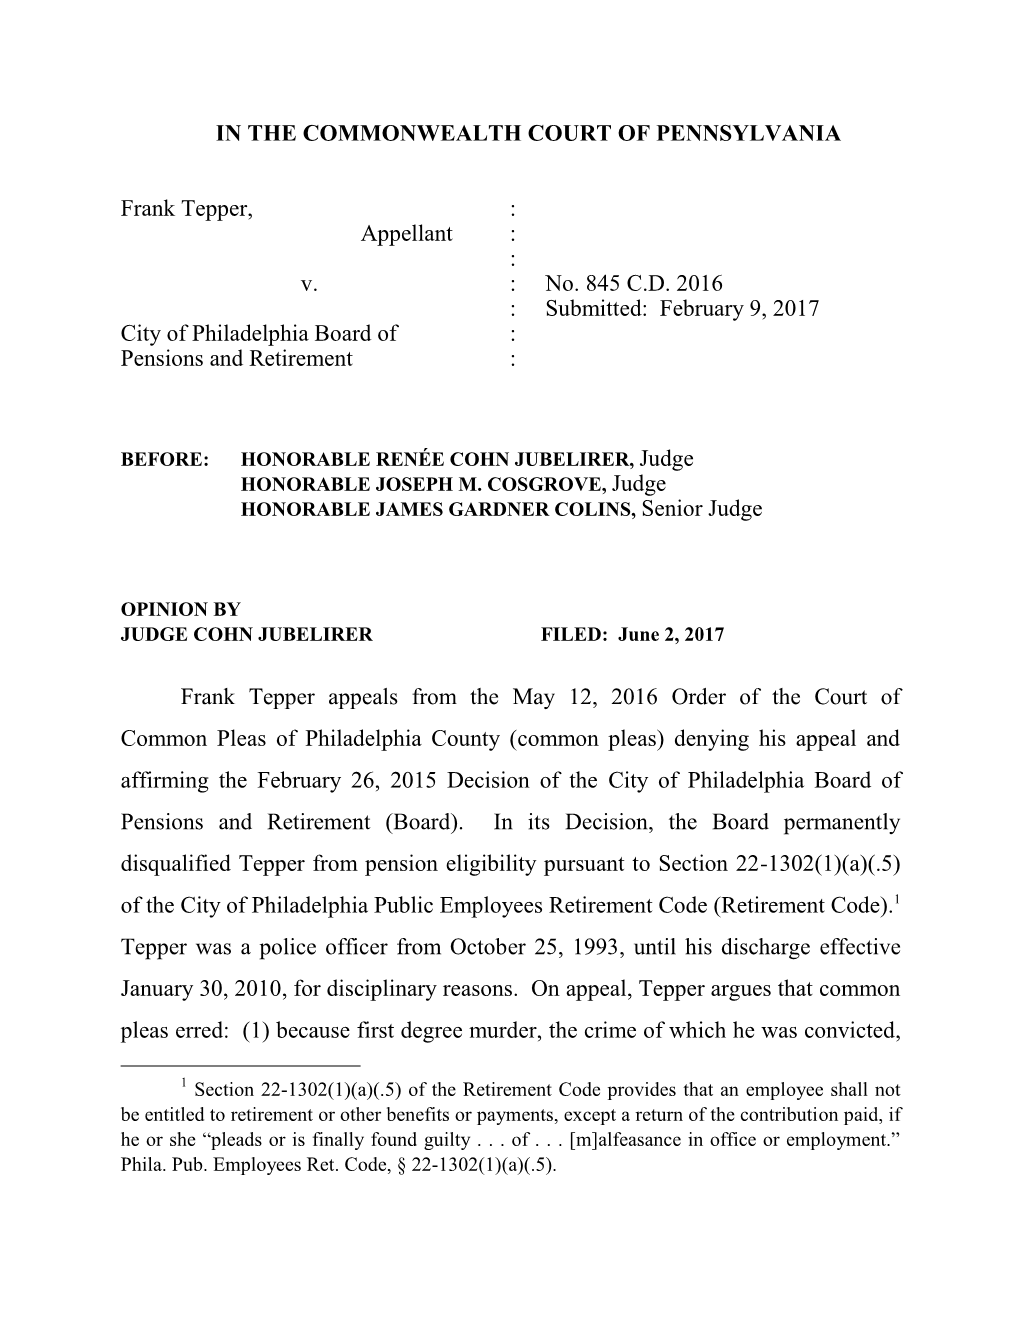 IN the COMMONWEALTH COURT of PENNSYLVANIA Frank Tepper, : Appellant : : V. : No. 845 C.D. 2016 : Submitted: Februa